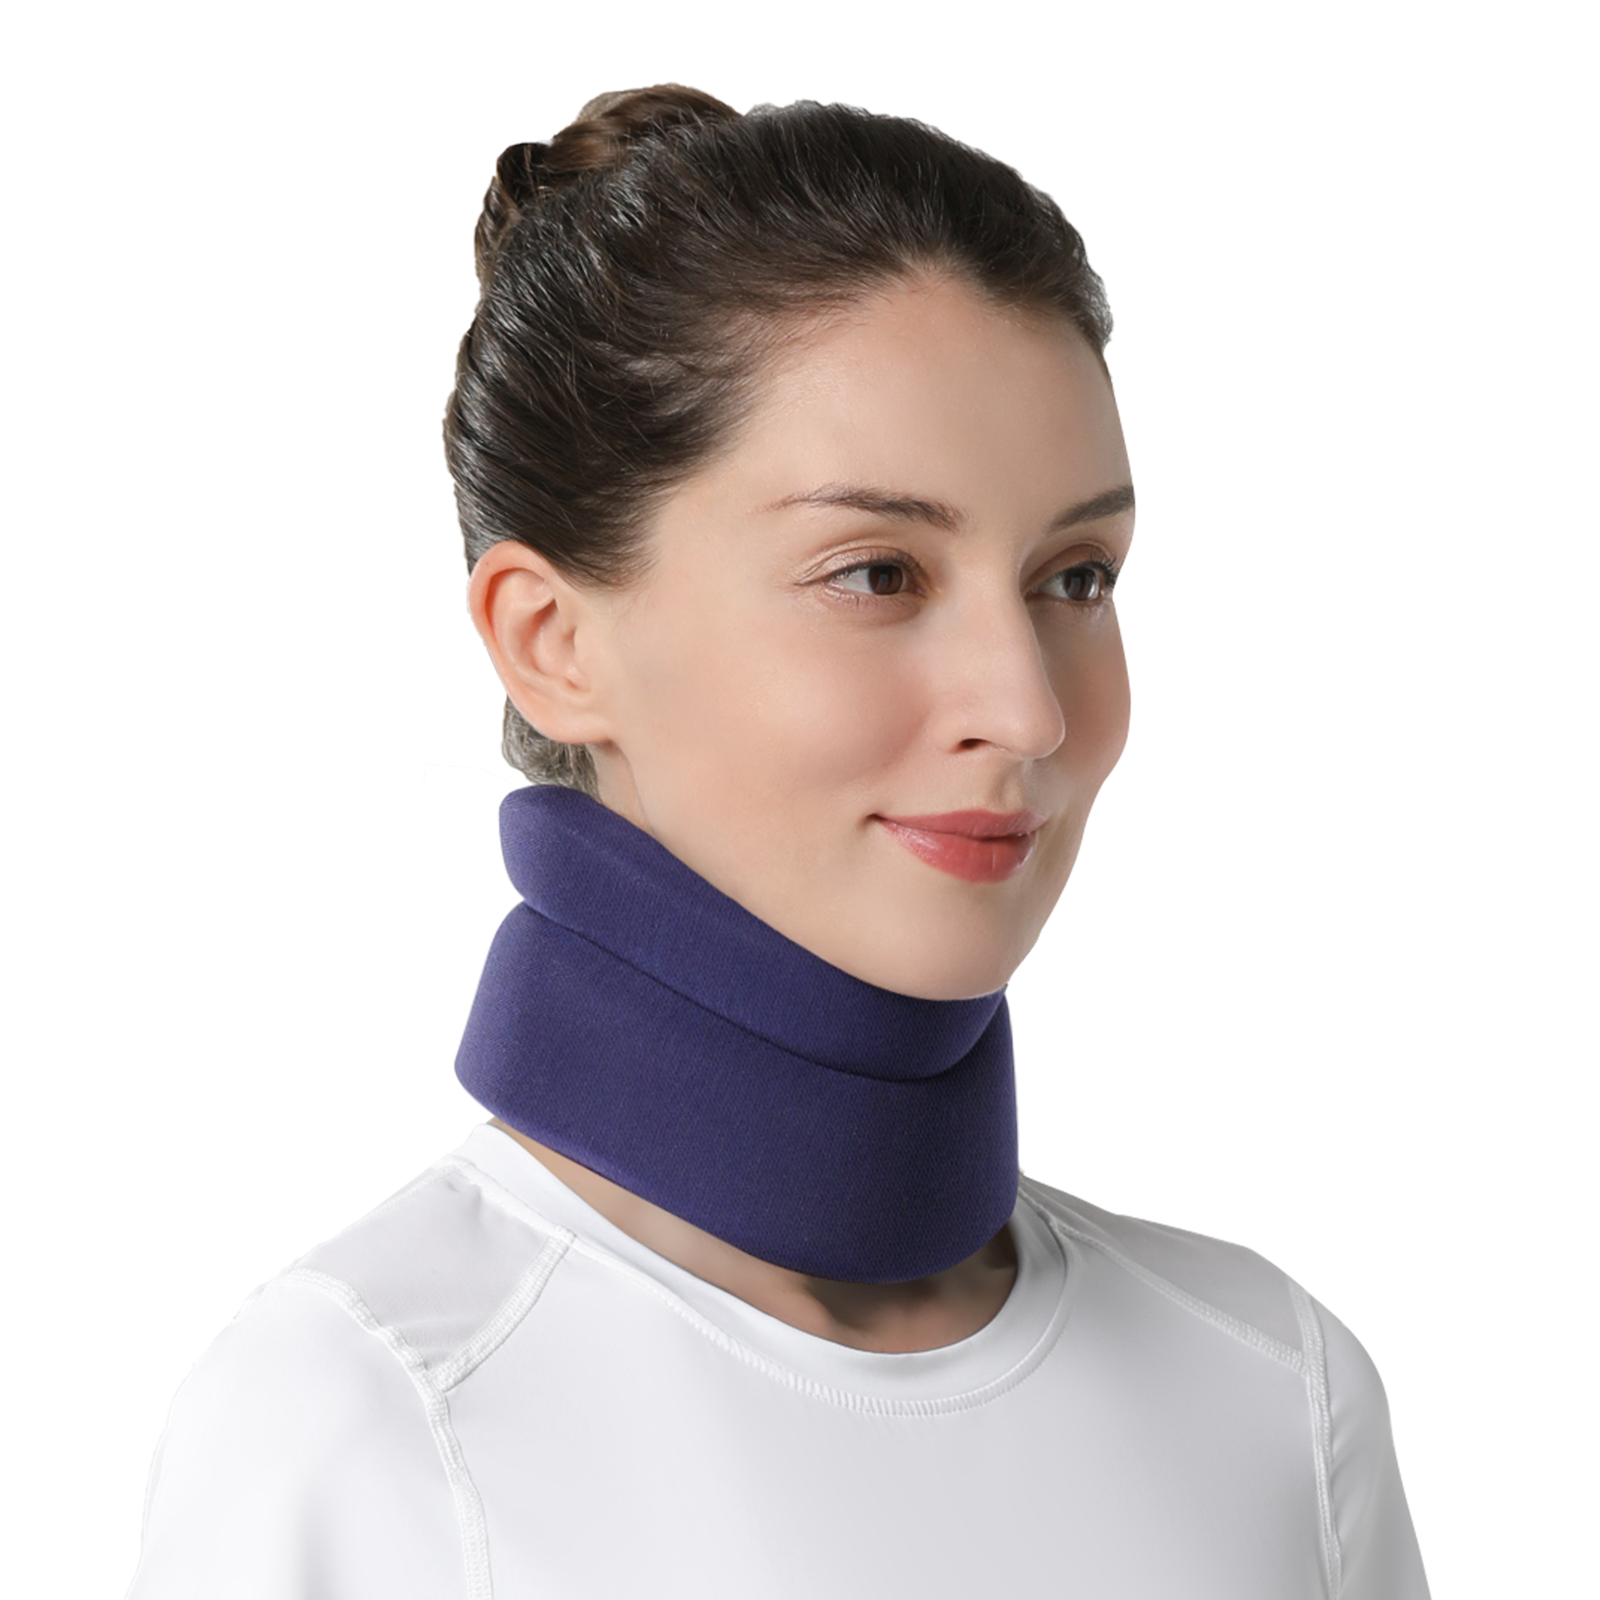 VELPEAU Neck Brace for Neck Pain and Support